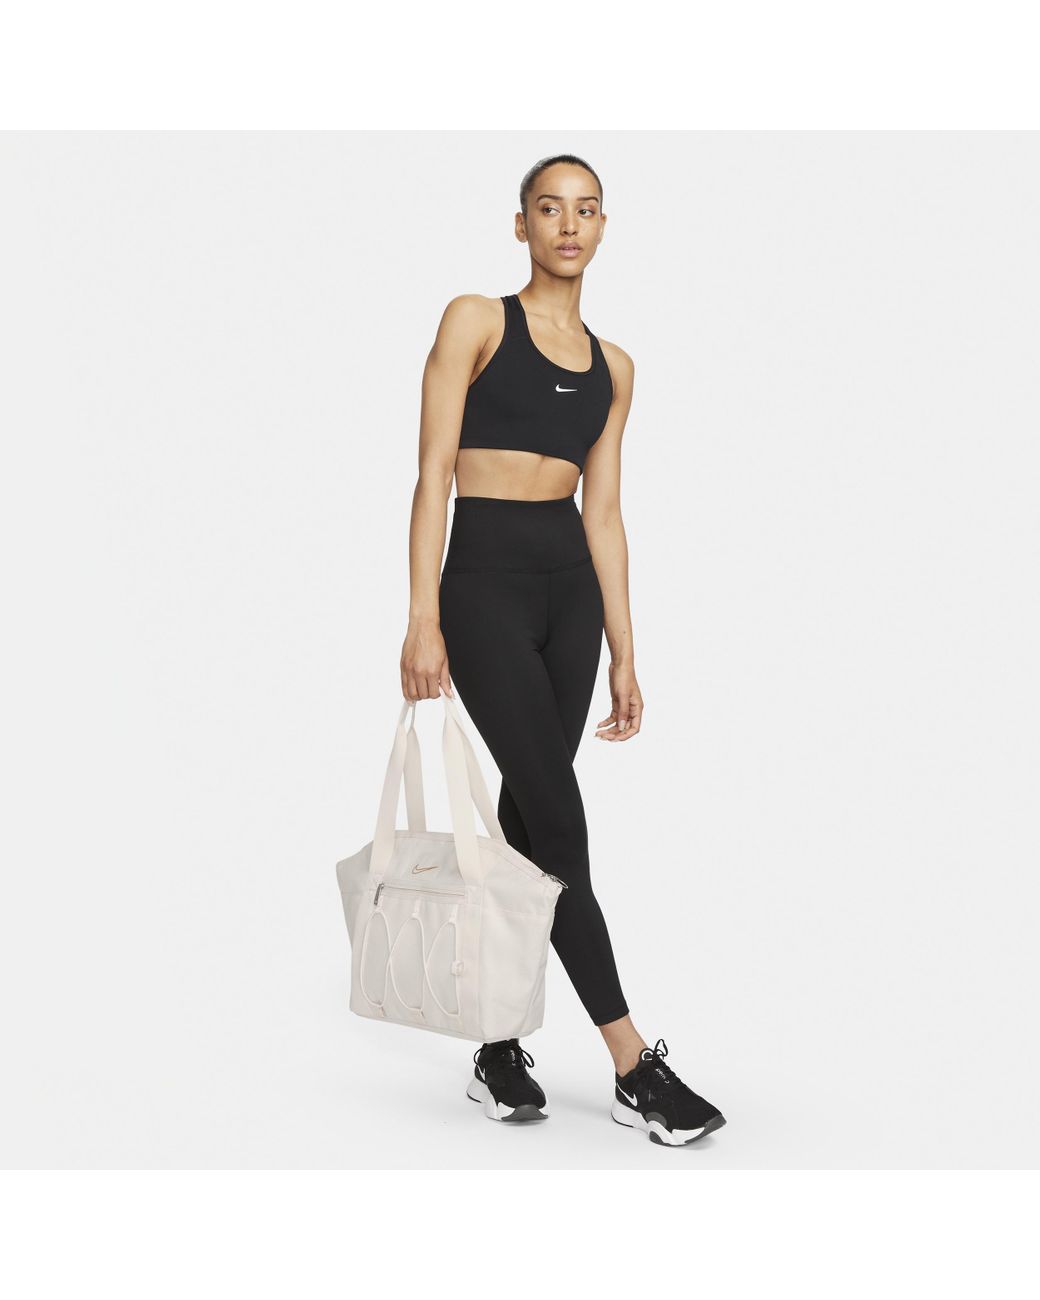 Nike One Training Tote Bag in Brown